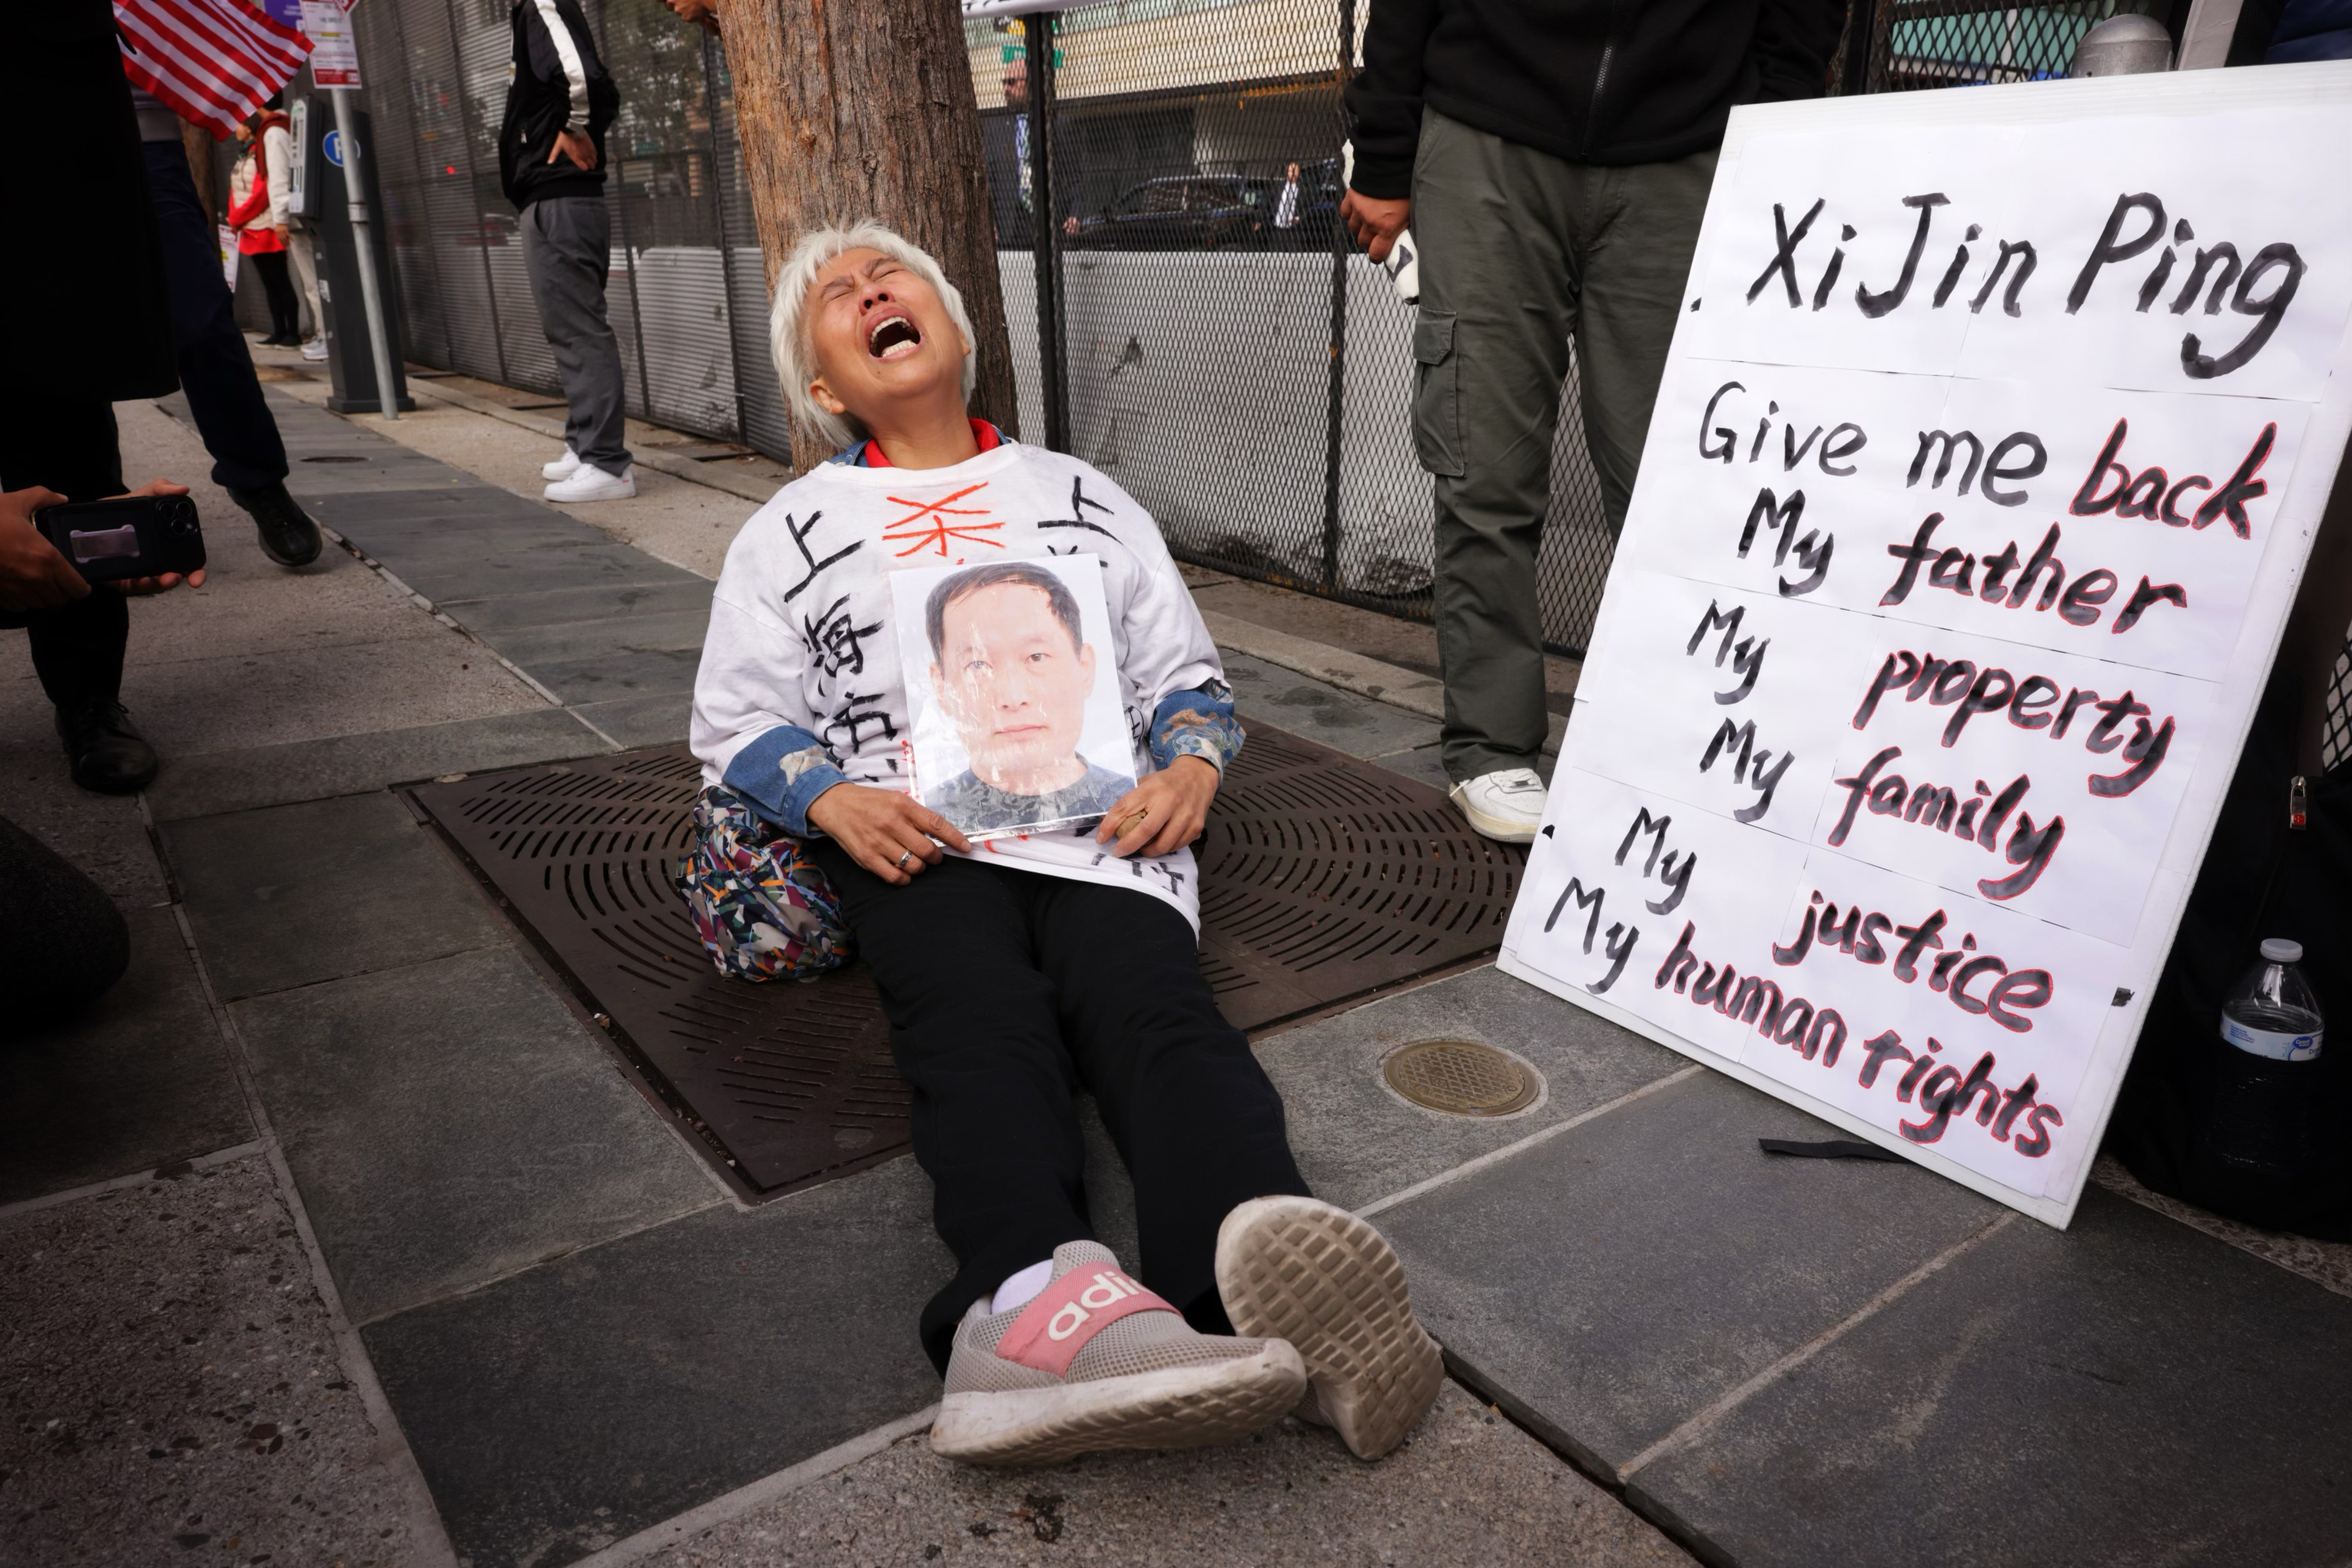 A woman screams while sitting on the ground with a large sign next to her that reads &quot;Xi Jin Ping, Give me back My father. My property, My family, My justive, My human rights&quot;